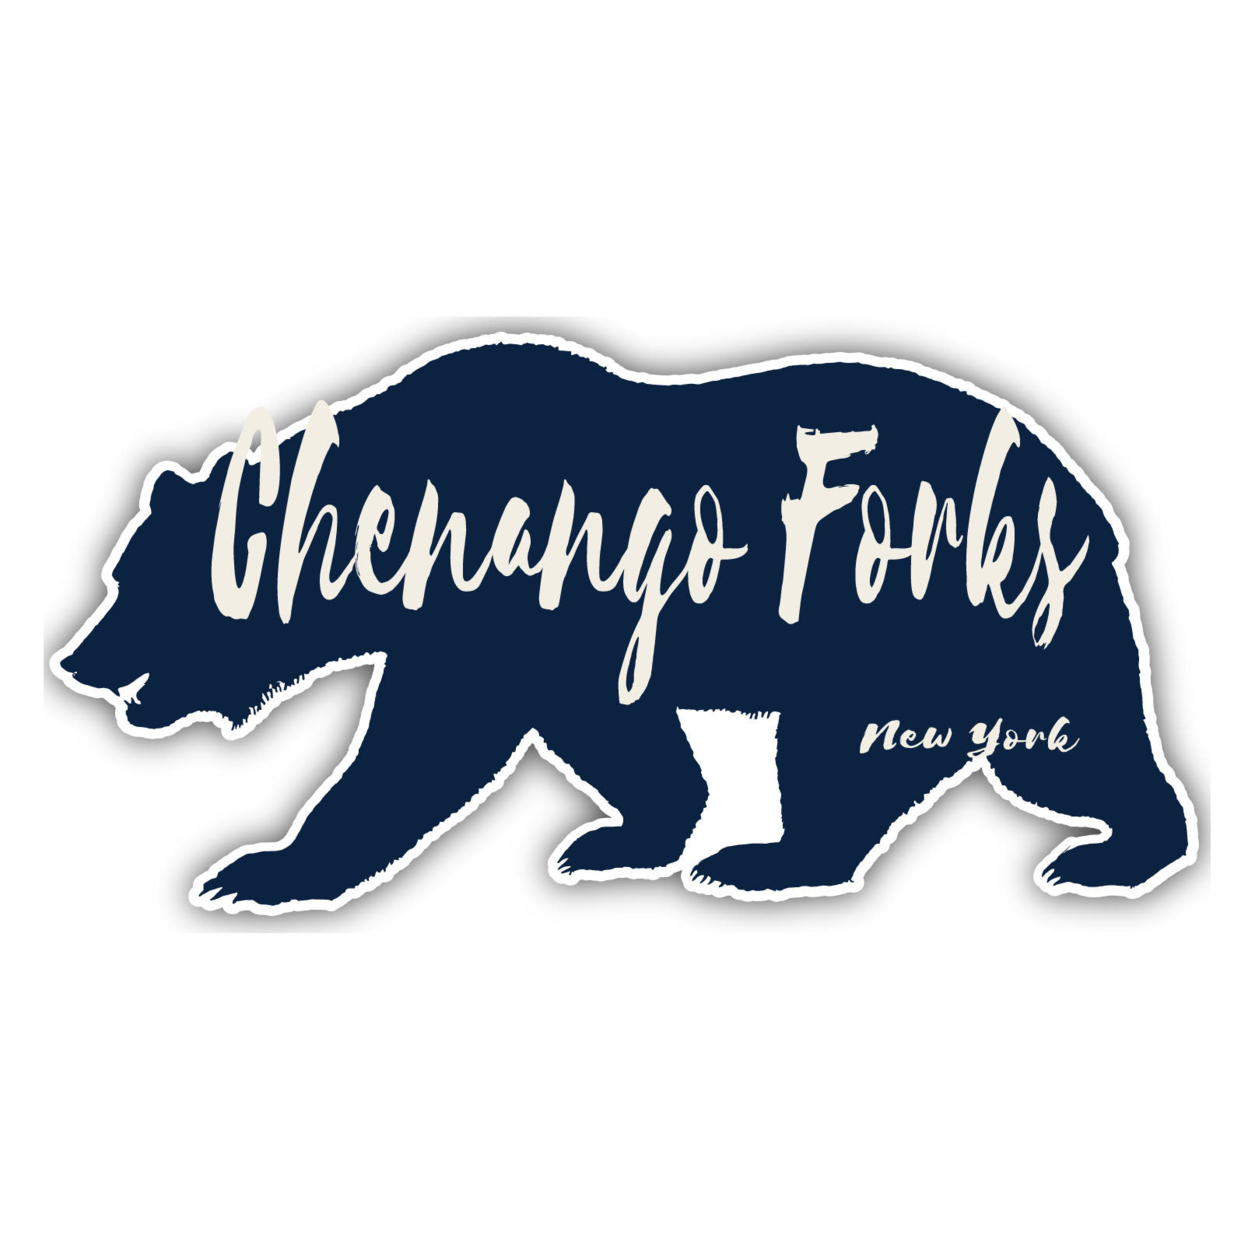 Chenango Forks New York Souvenir Decorative Stickers (Choose Theme And Size) - 4-Pack, 8-Inch, Bear